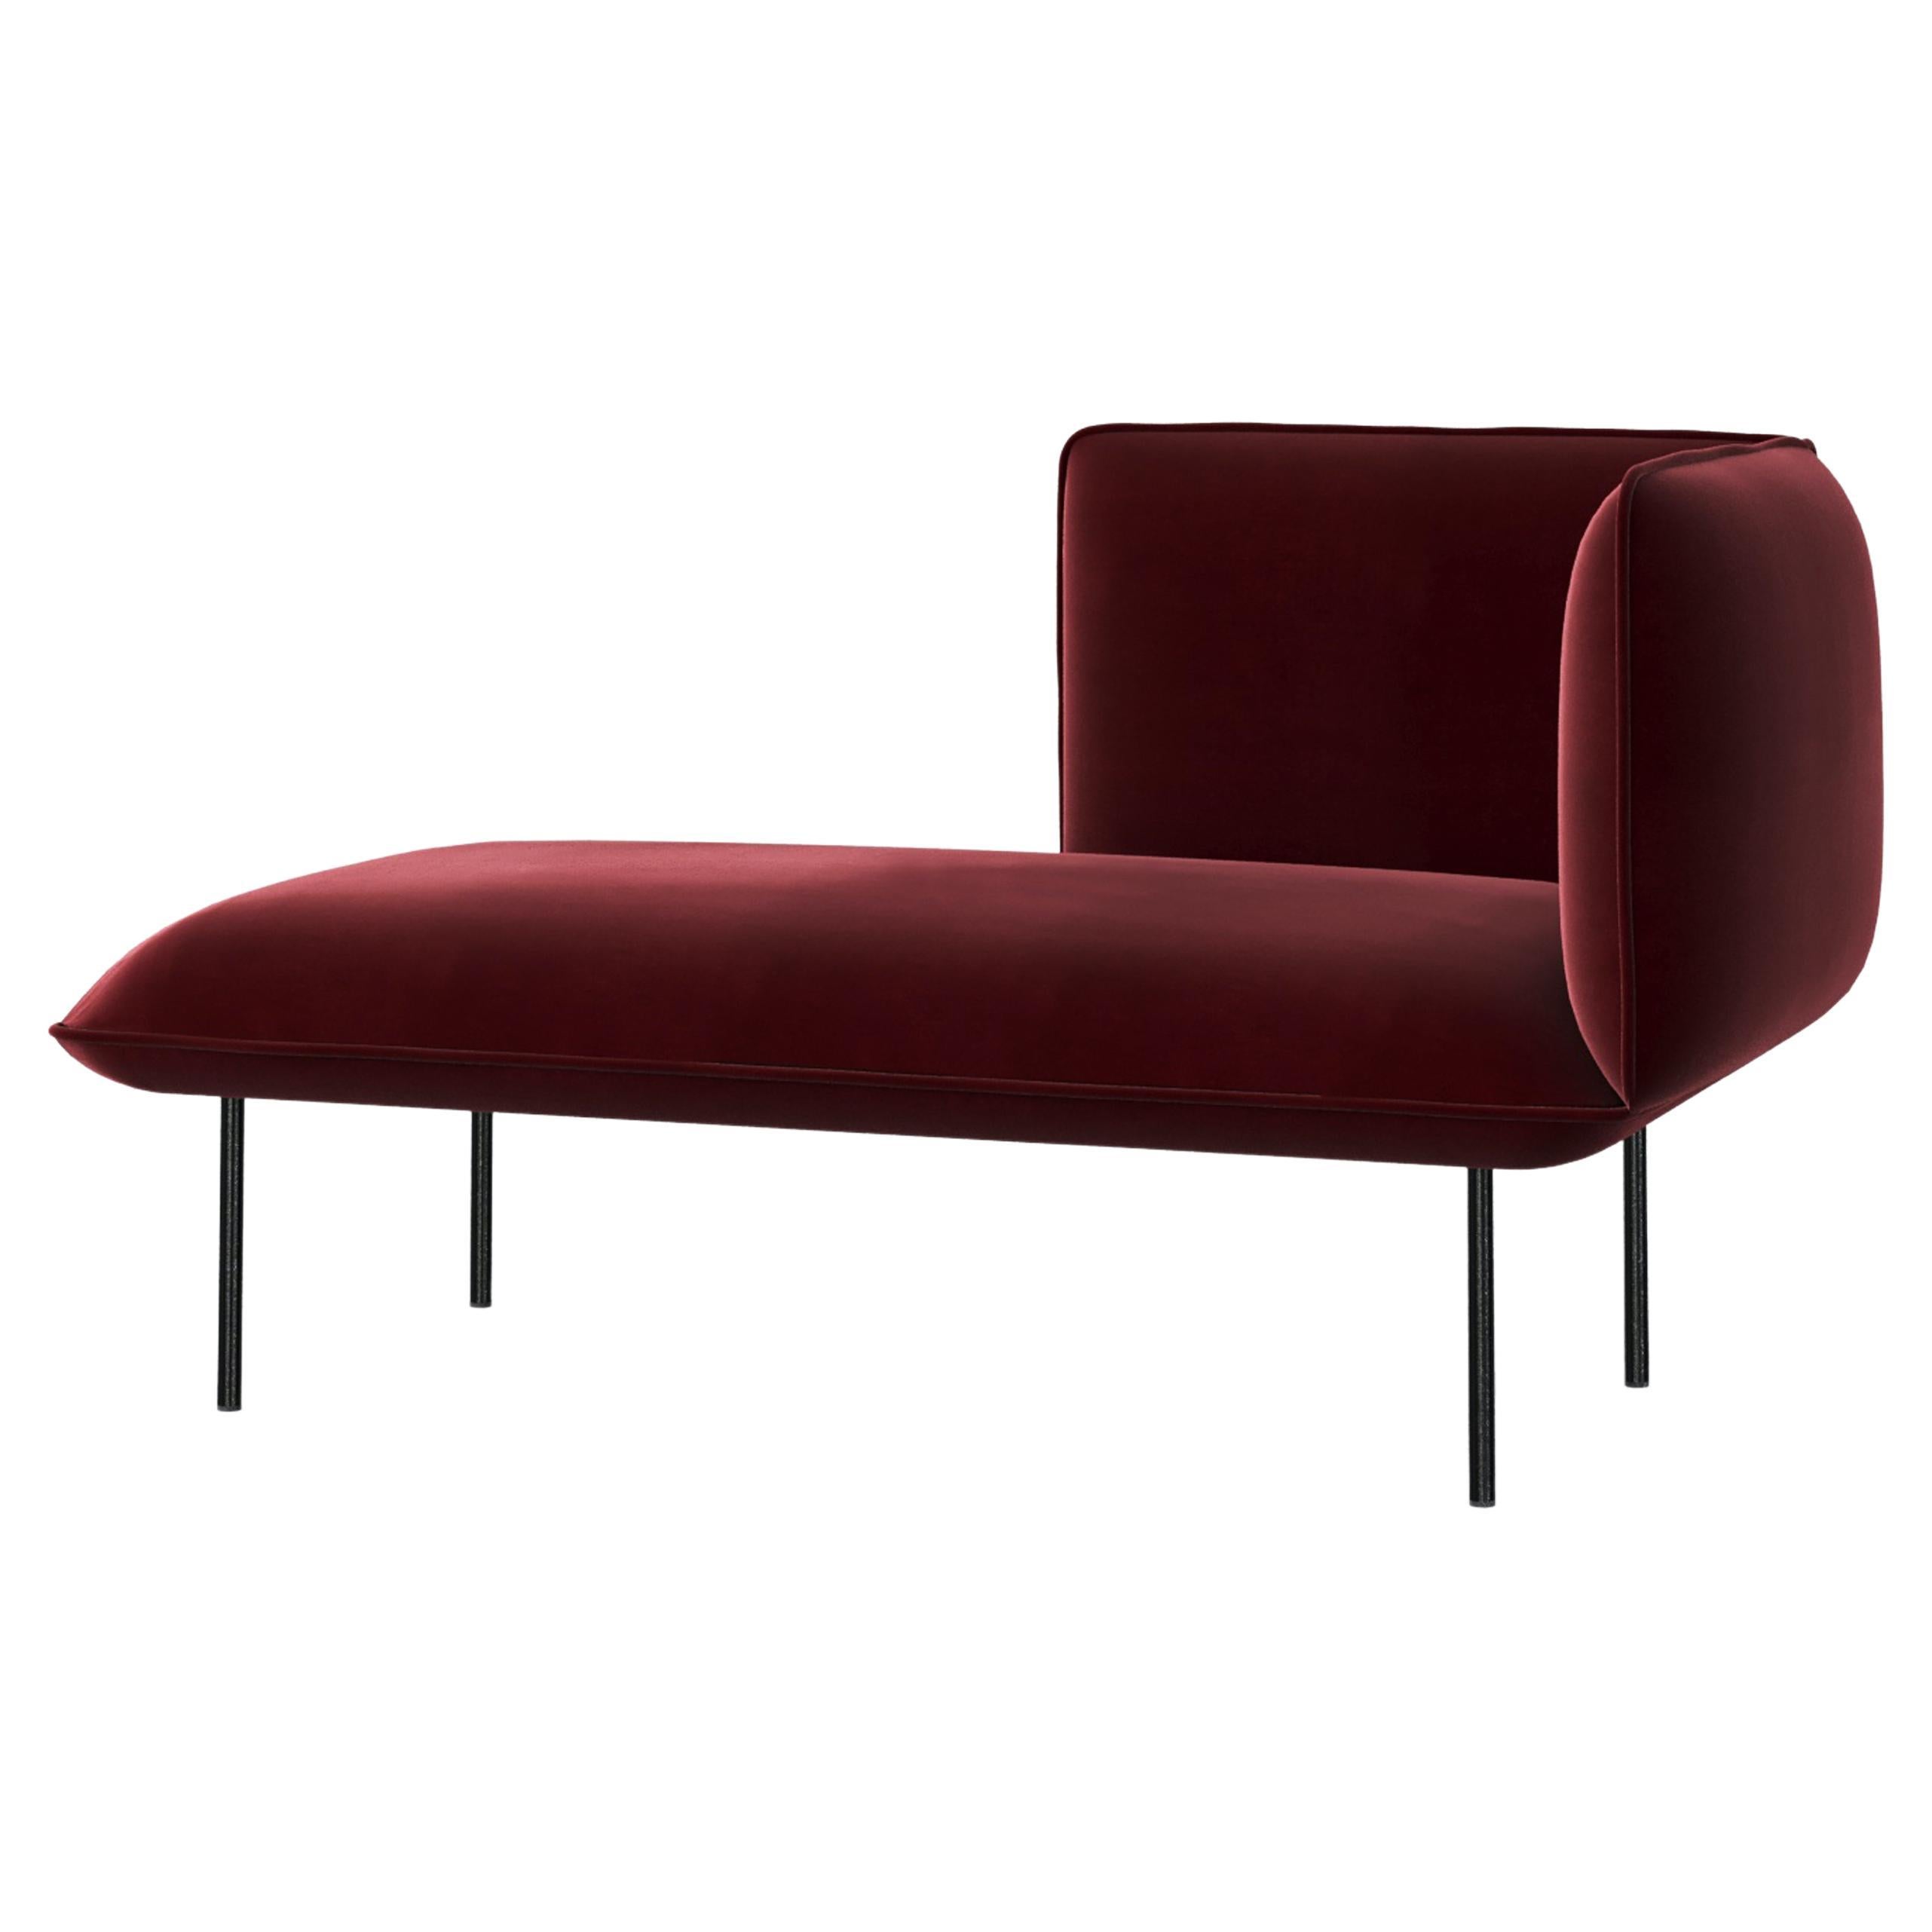 Nakki Lobby Chaise Longue Right by Mika Tolvanen For Sale